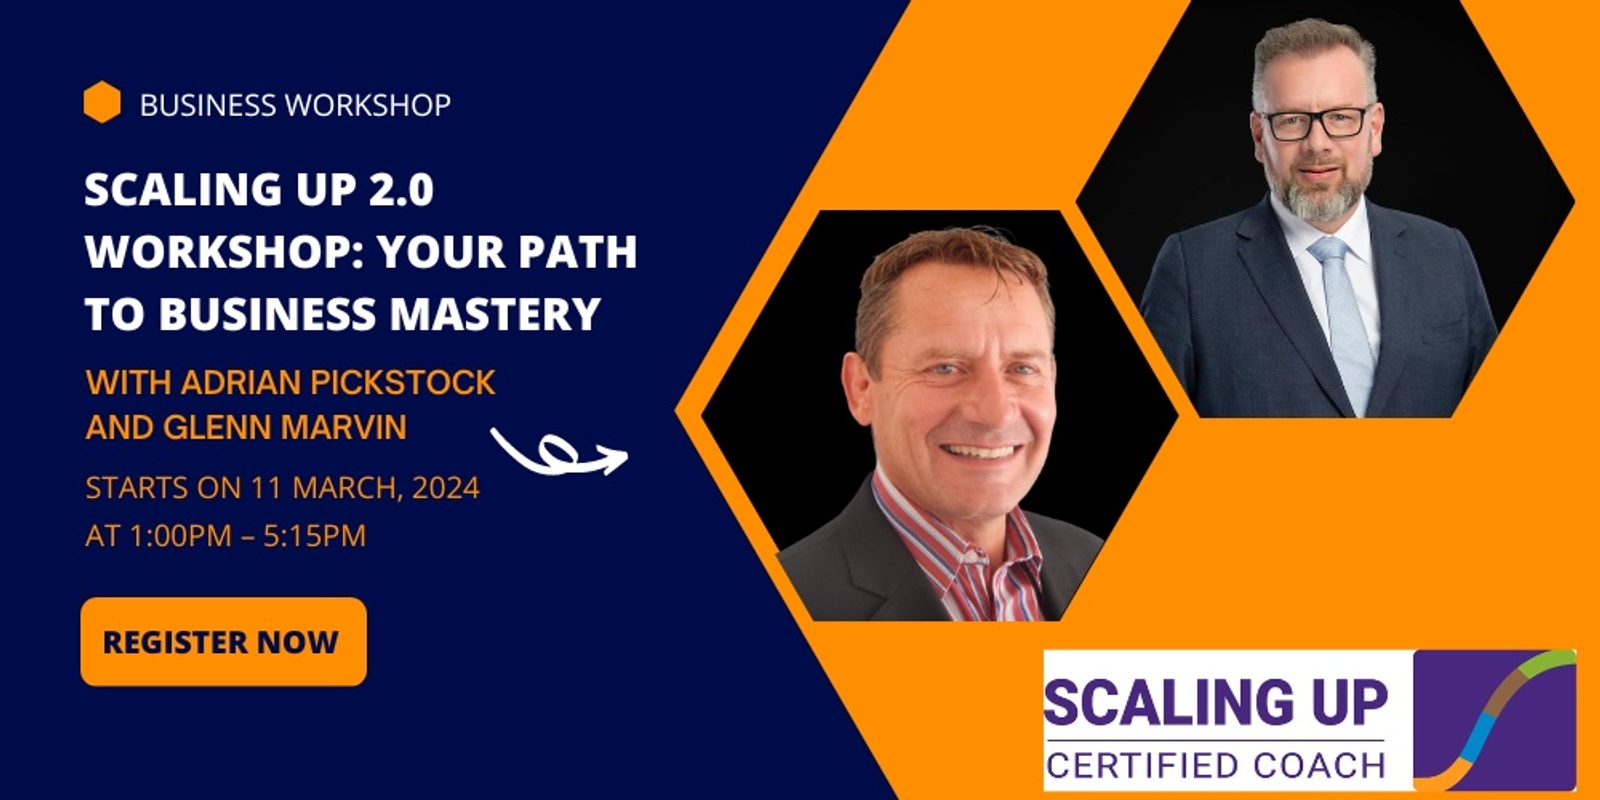 Banner image for Scaling Up Workshop - Auckland: Your Path to Business Mastery